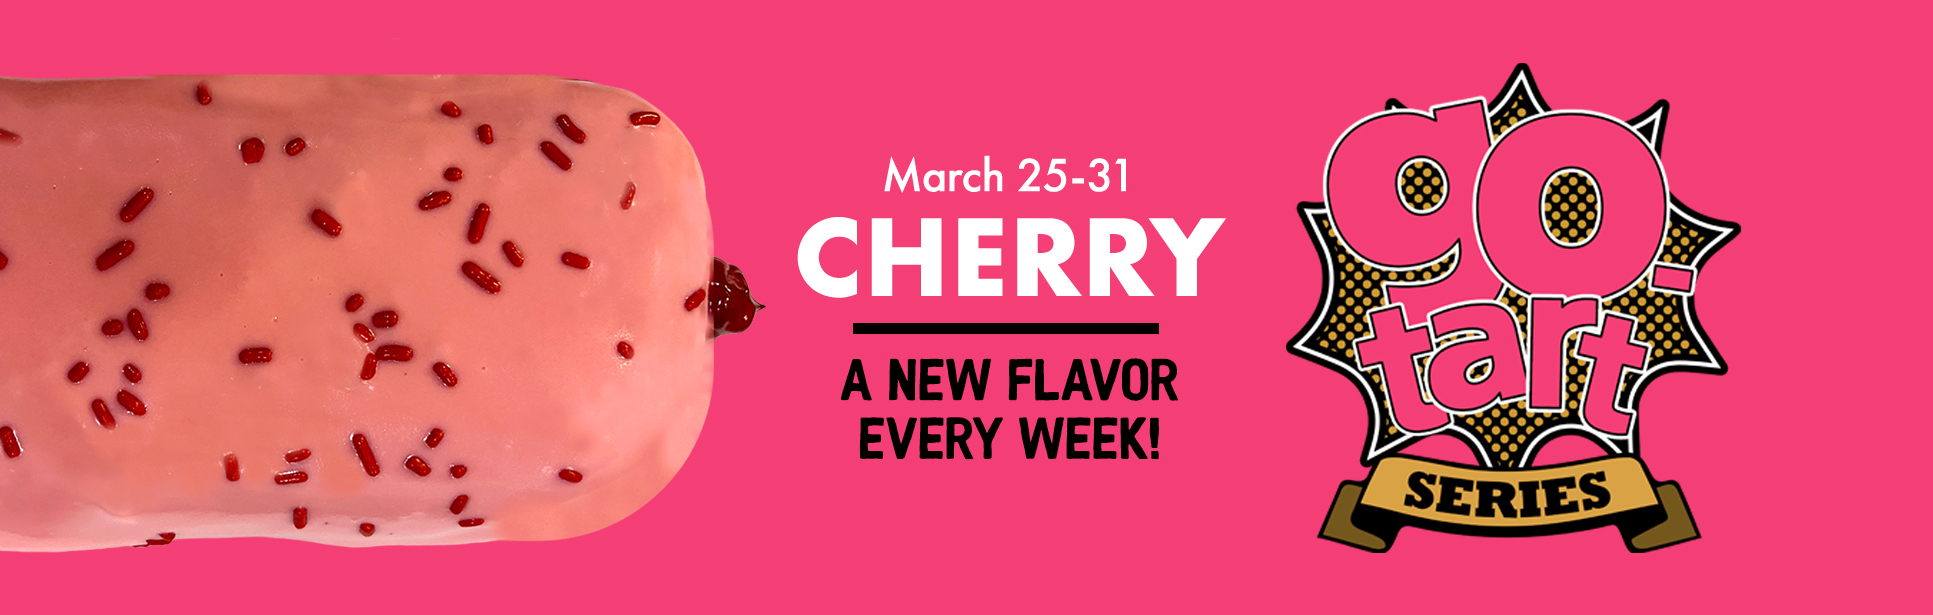 Cherry go-tart doughnut noted as available march 25-31 as part of the go-tart series. the cherry go-tart doughnut is light pink, almost red with red sprinkles and cherry filling spilling out the side.